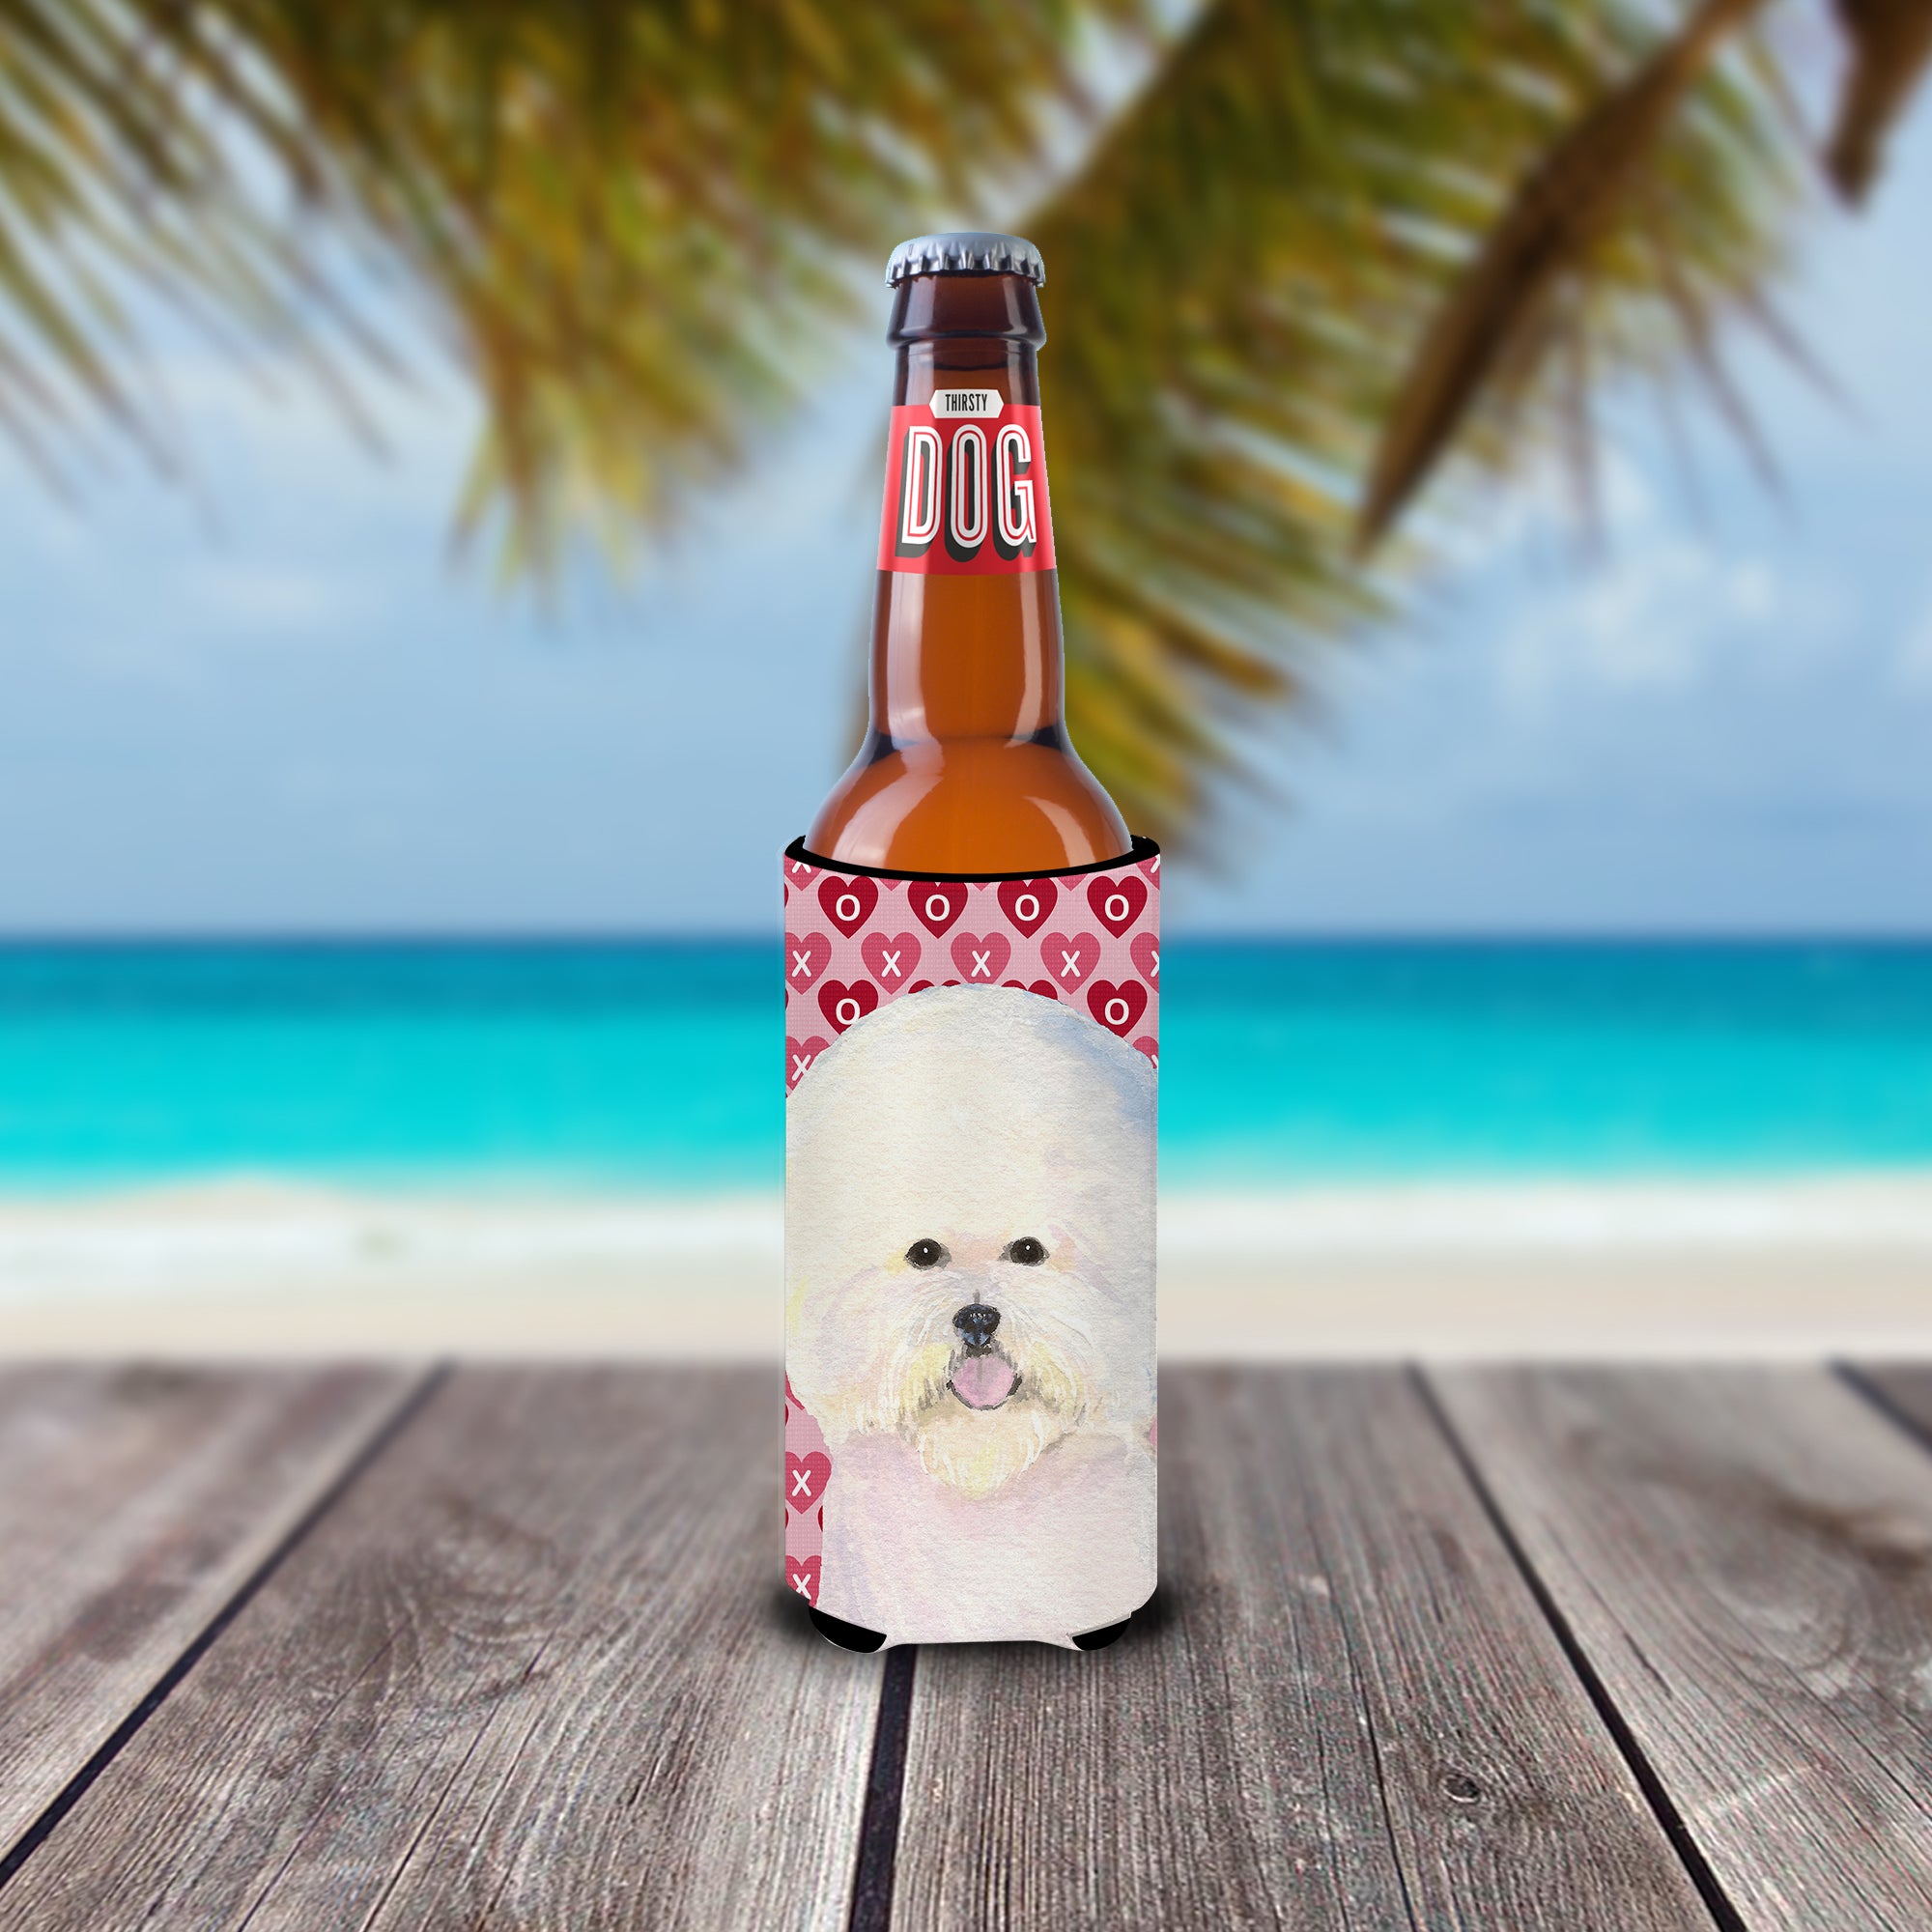 Bichon Frise Hearts Love and Valentine's Day Portrait Ultra Beverage Insulators for slim cans SS4526MUK